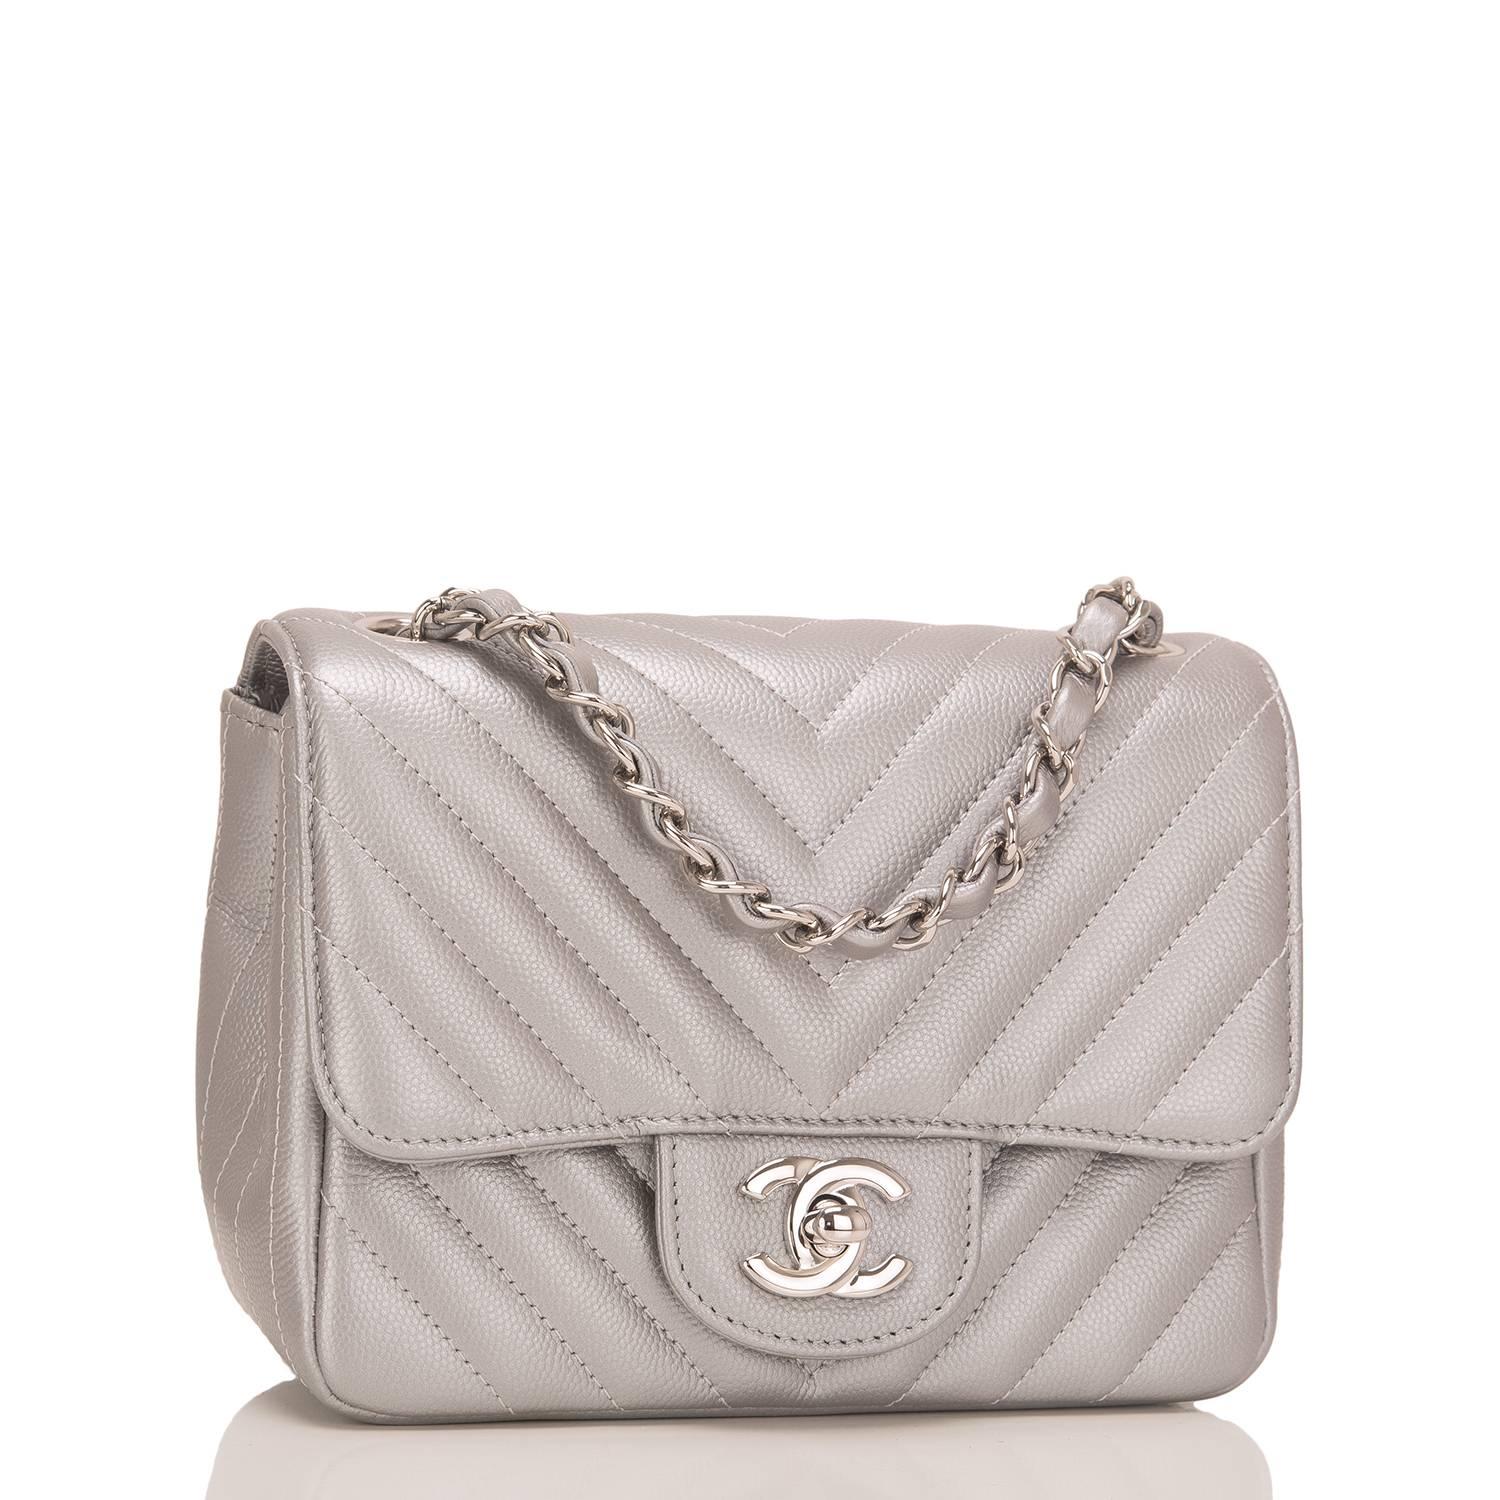 Chanel silver chevron quilted square Mini flap bag of silver caviar leather with silver tone hardware.

This bag features a front flap with CC turnlock closure, a half moon back pocket, and an interwoven silver tone chain link with silver leather